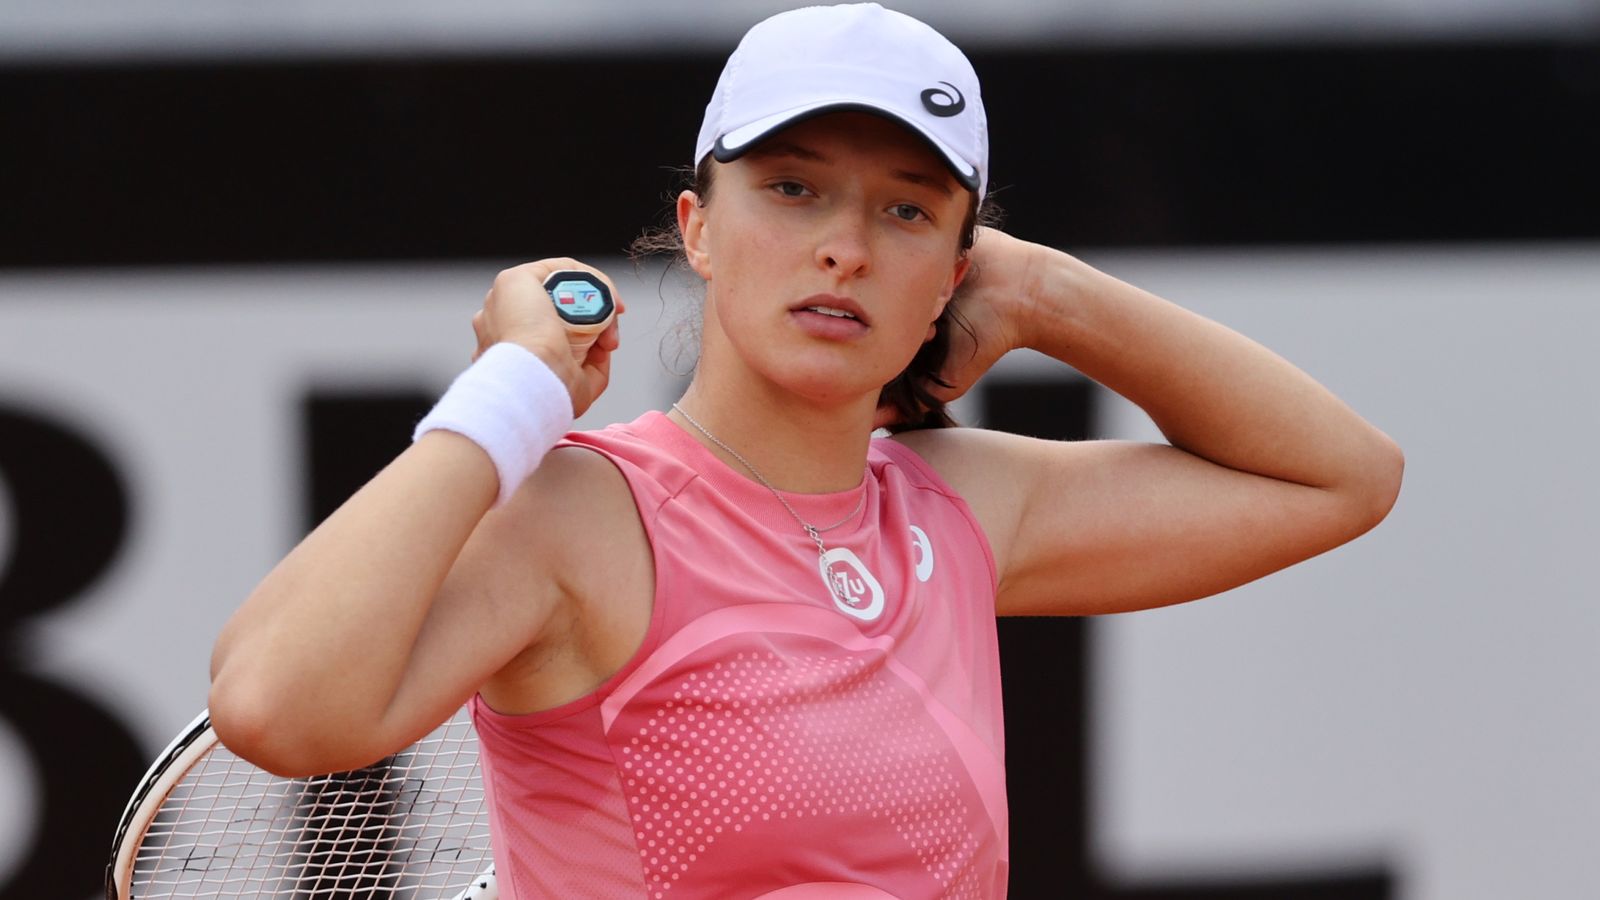 French Open champion Iga Swiatek wins twice in a day to set up Rome